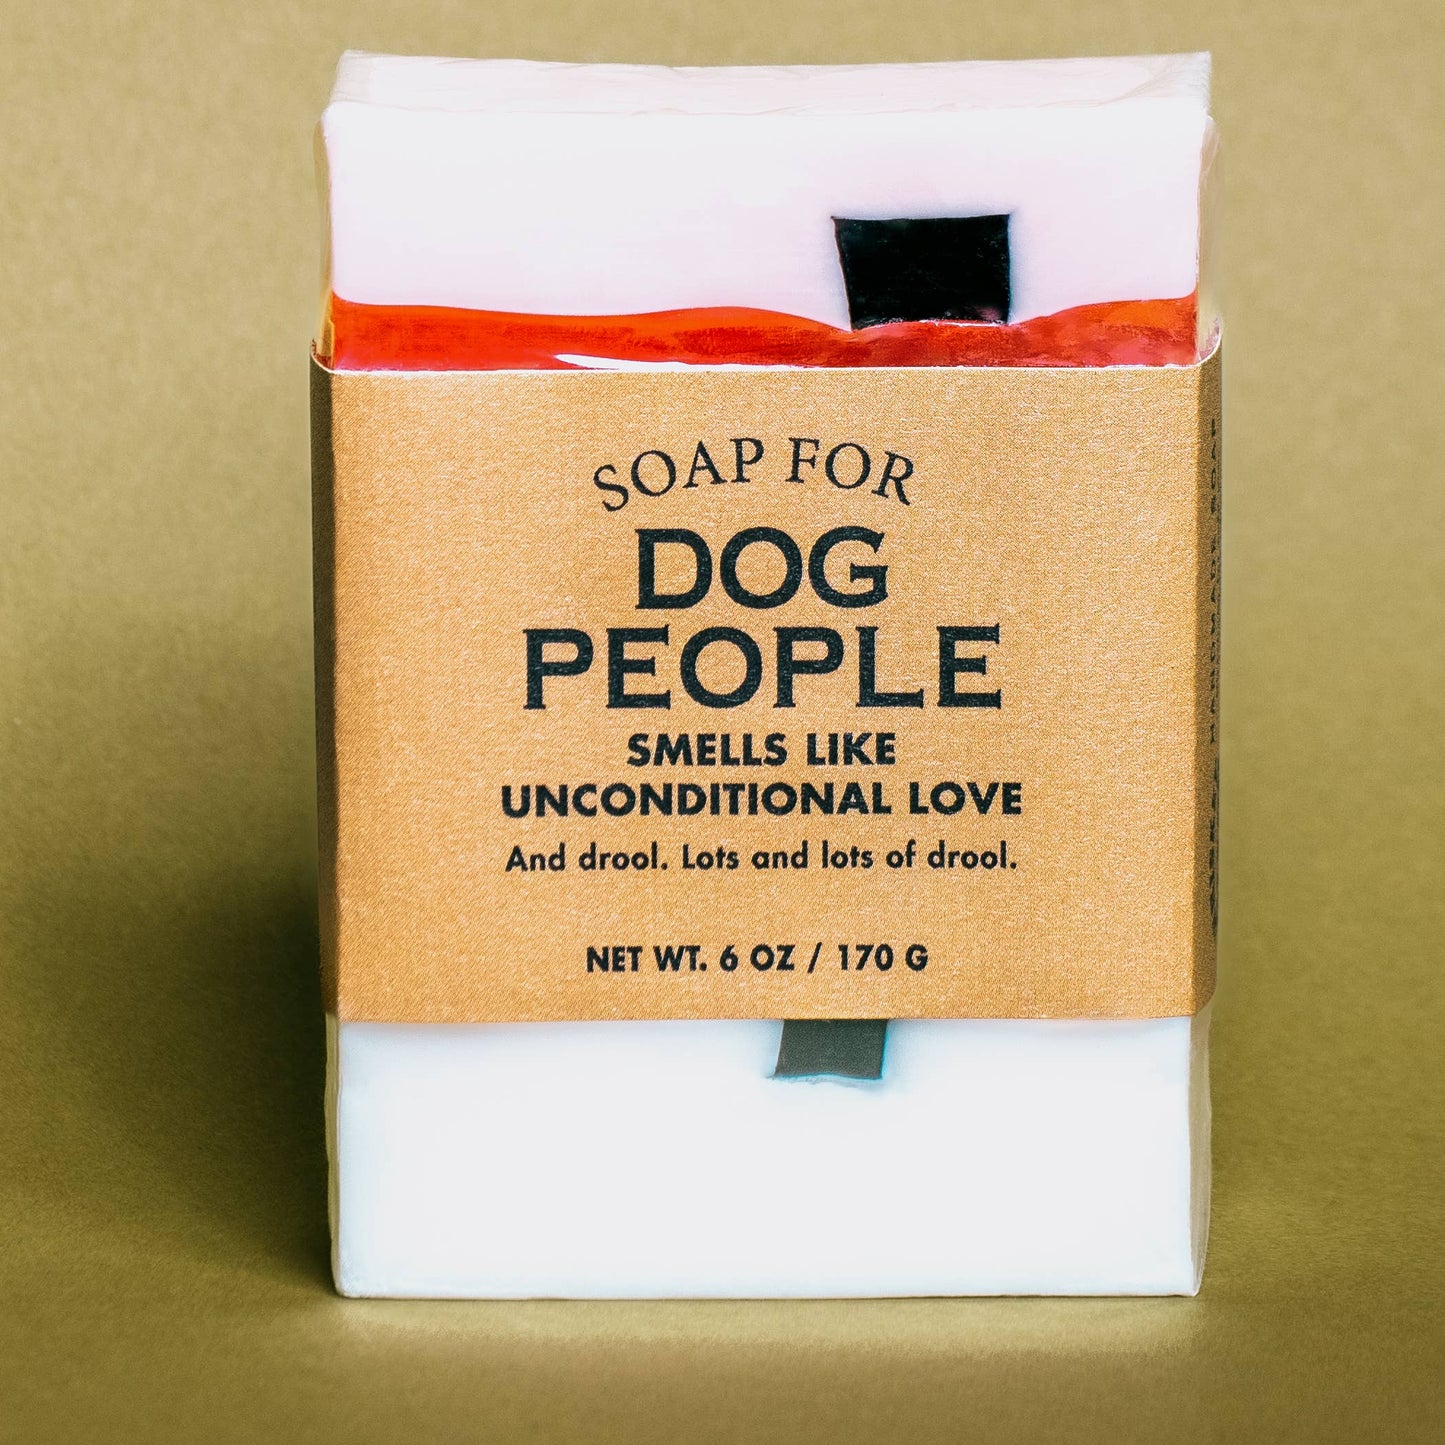 A Soap for Dog People | Funny Soap | Stocking Stuffer